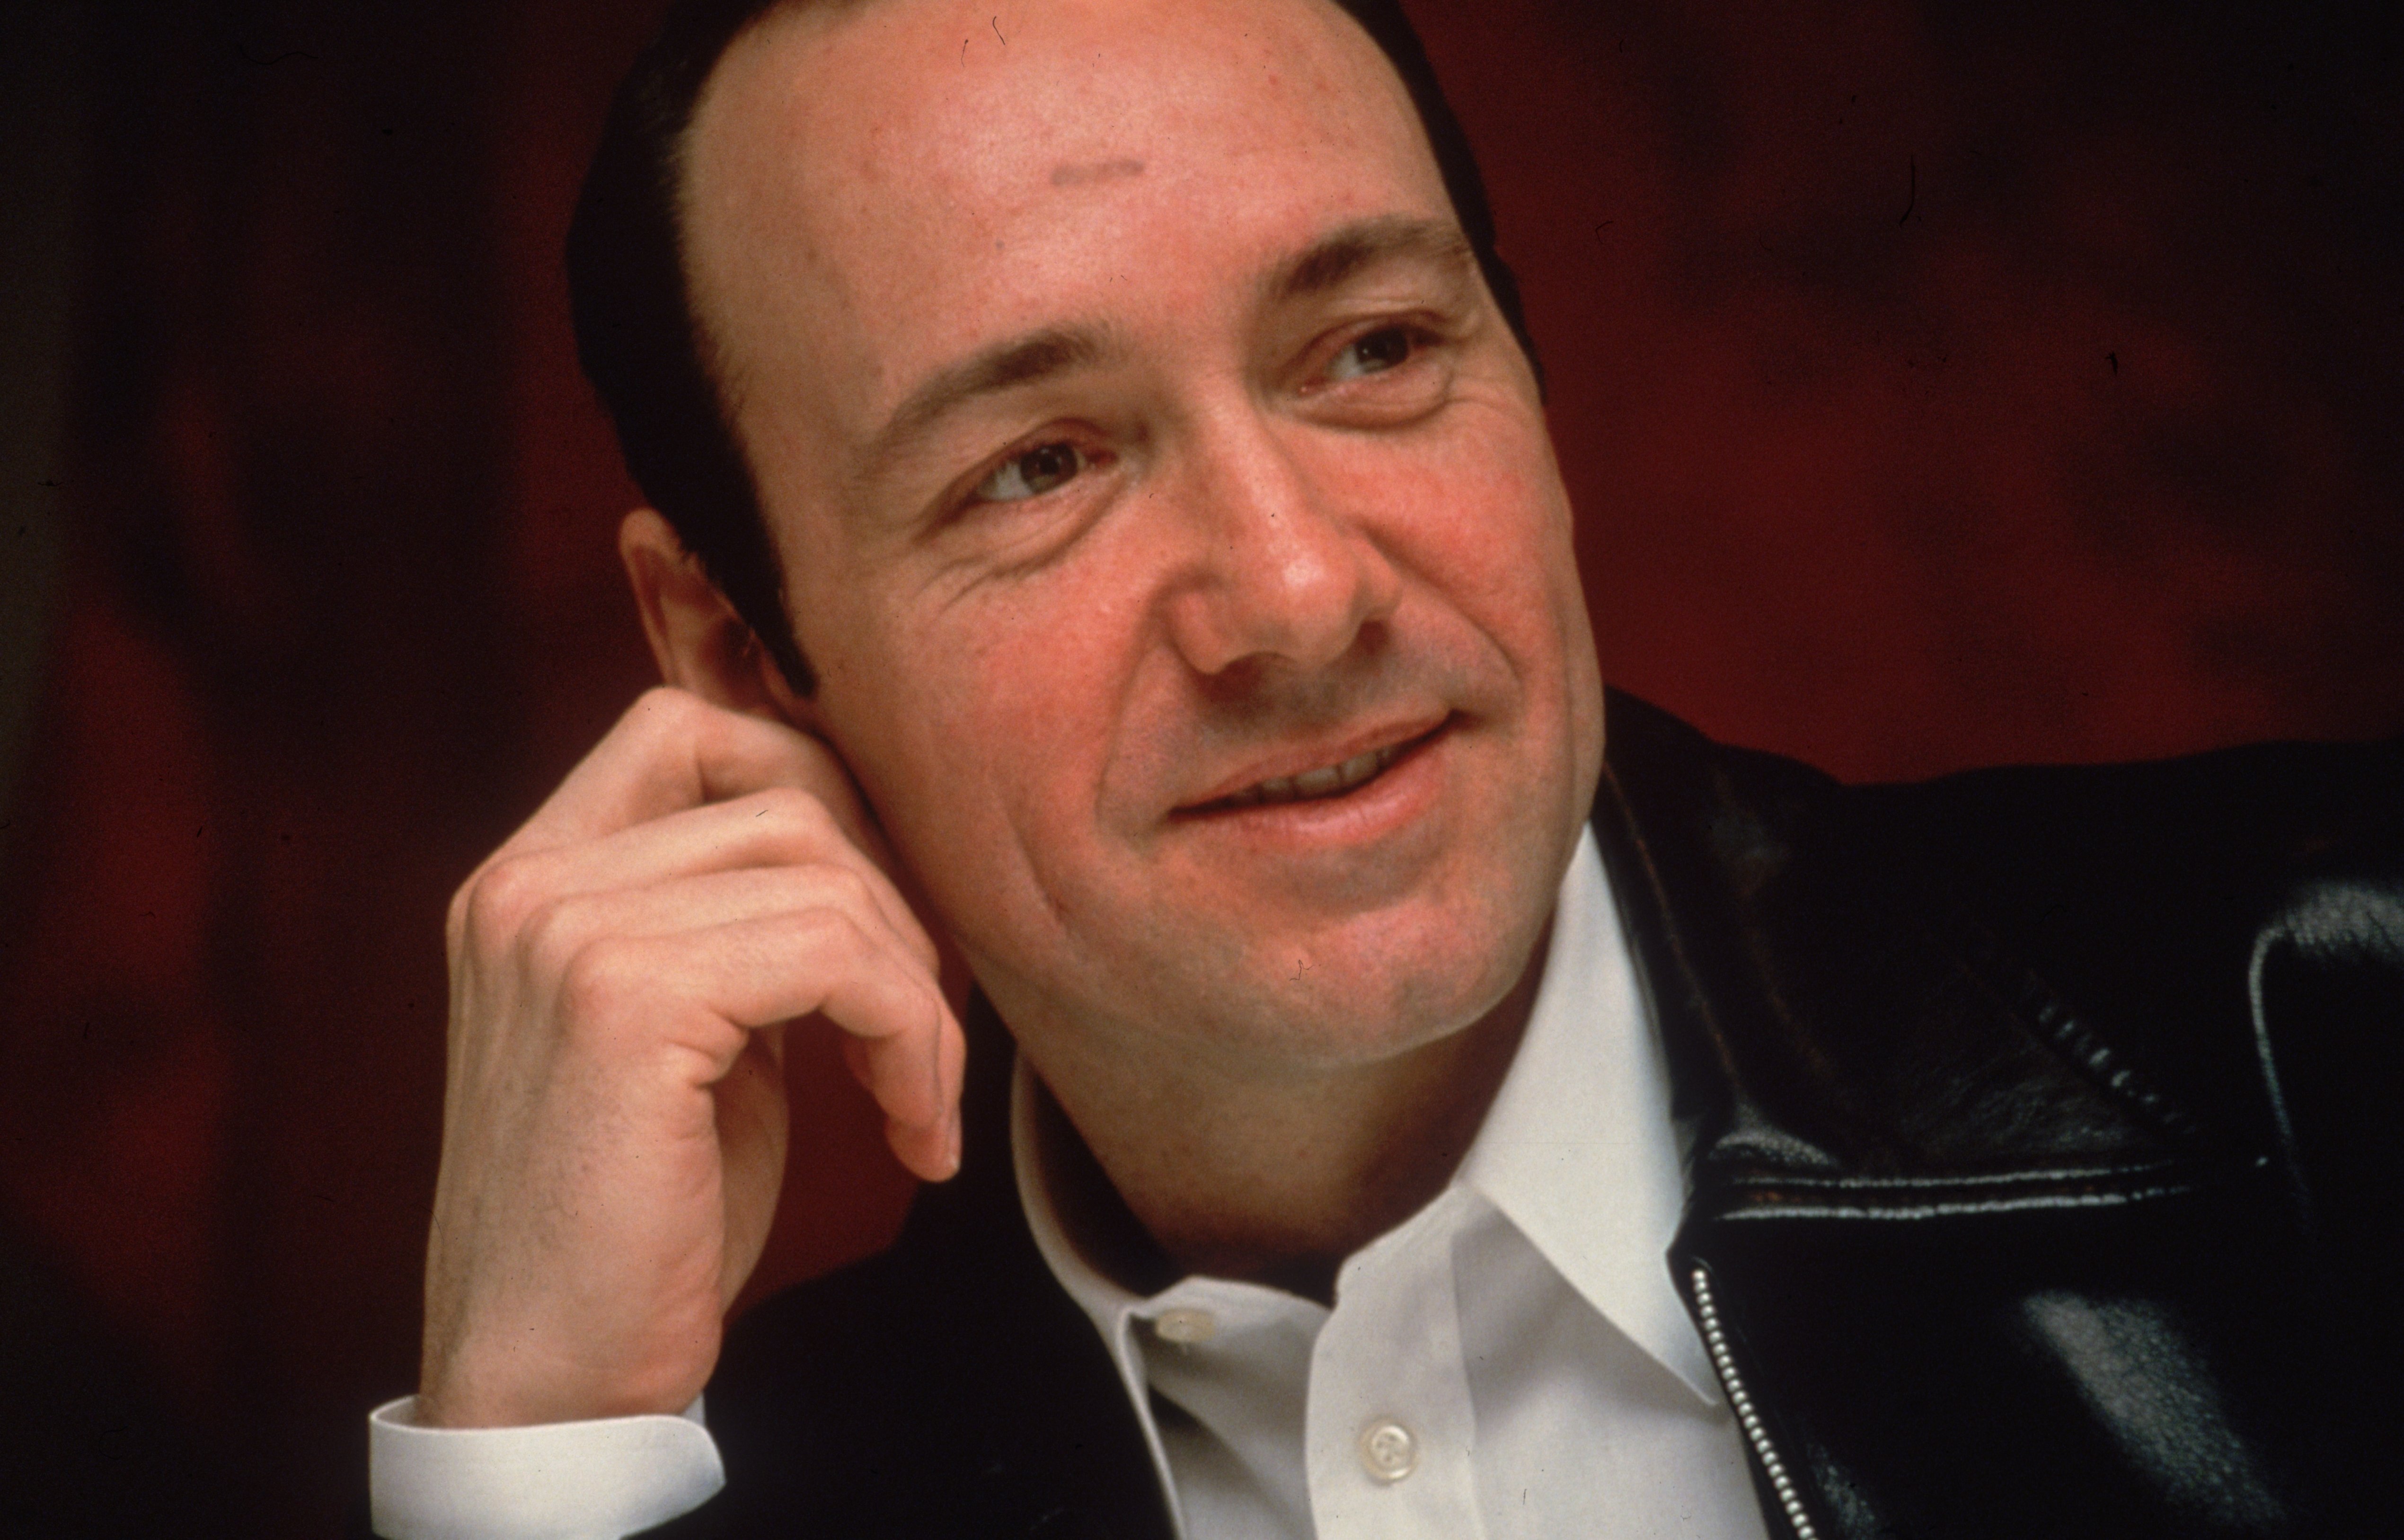 Kevin Spacey in Beverly Hills, California on December 11, 1998. | Source: Getty Images